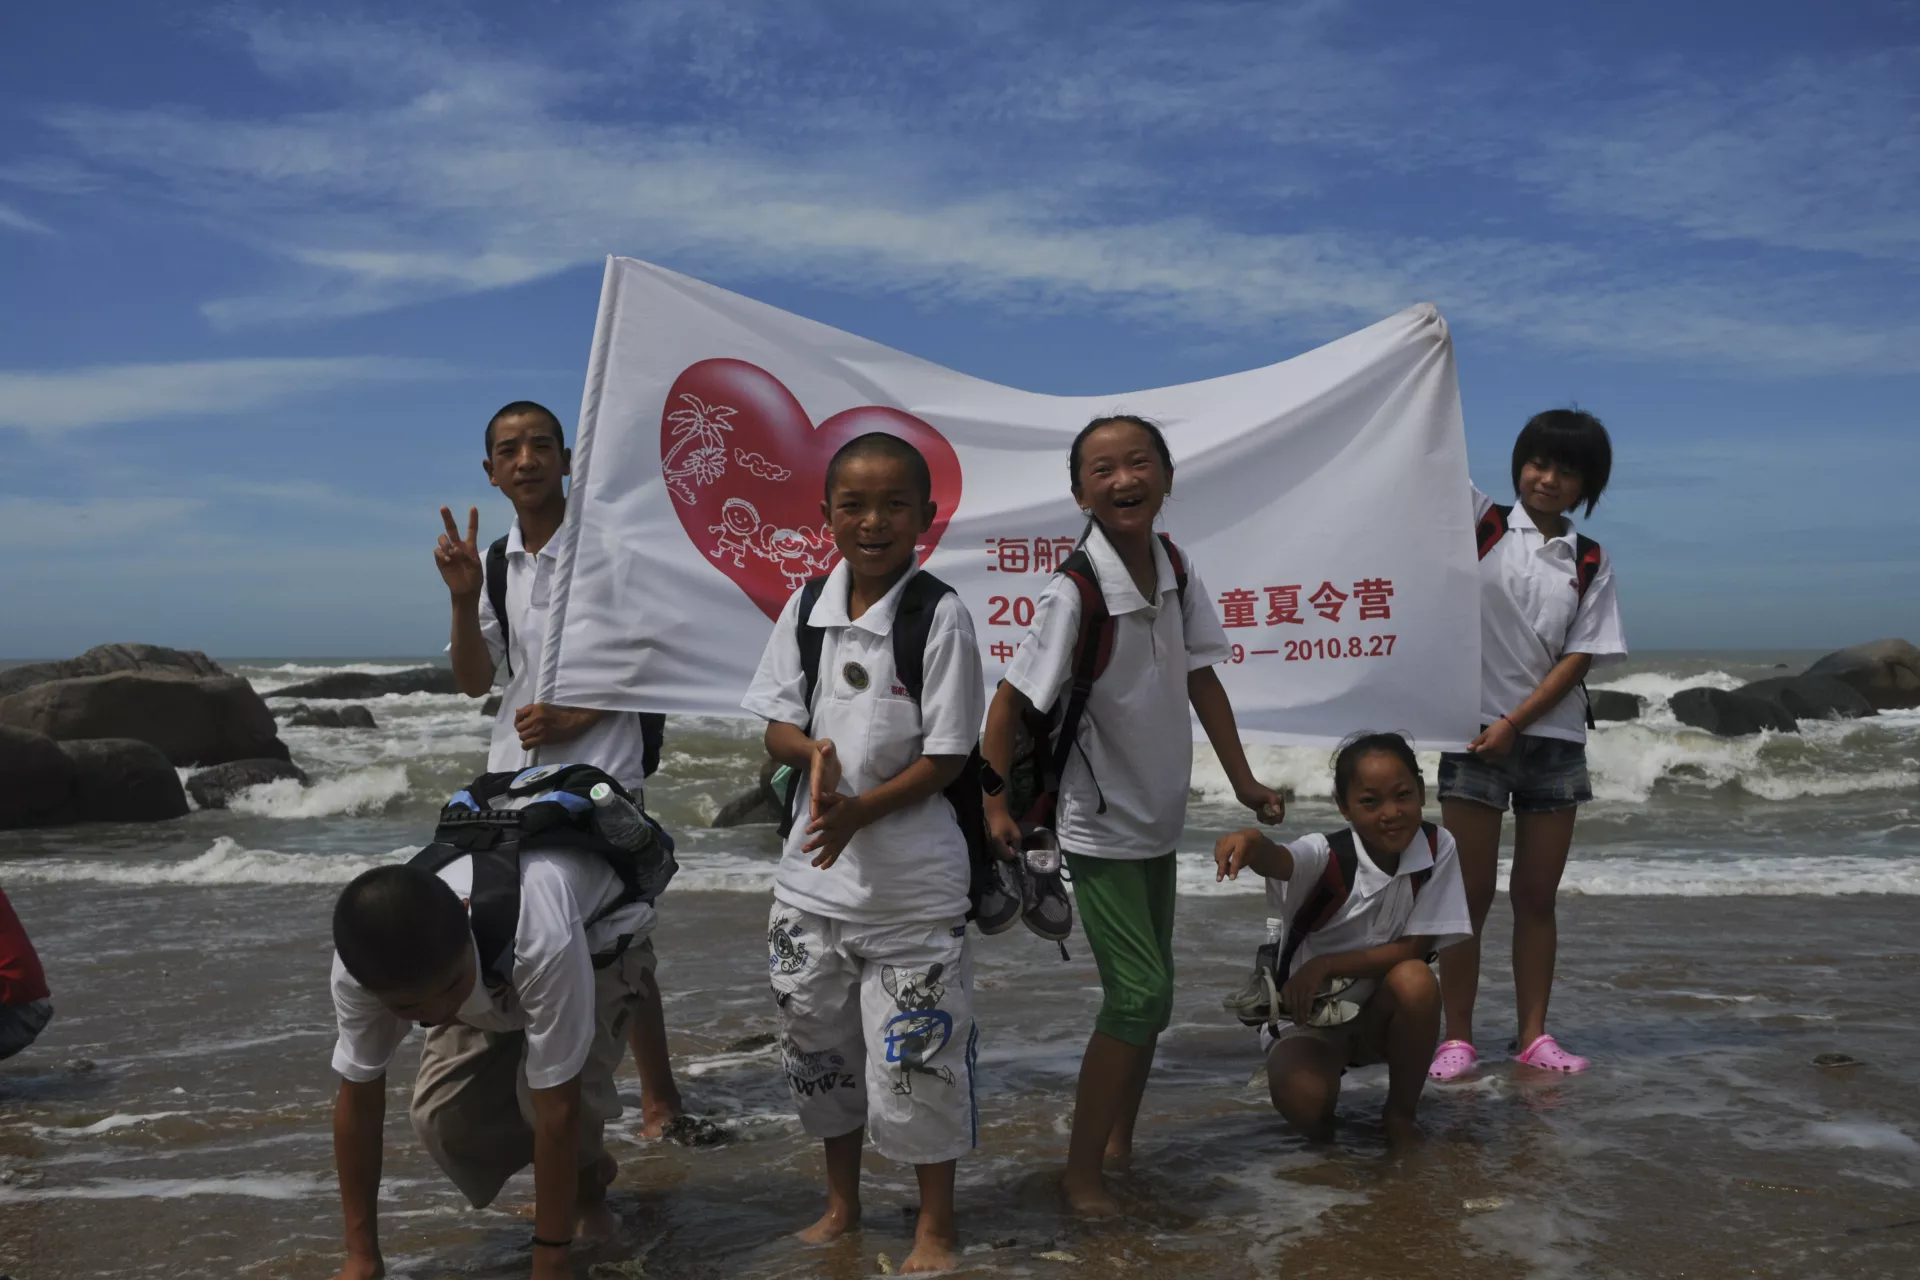 Children pose for a photo by the sea side.